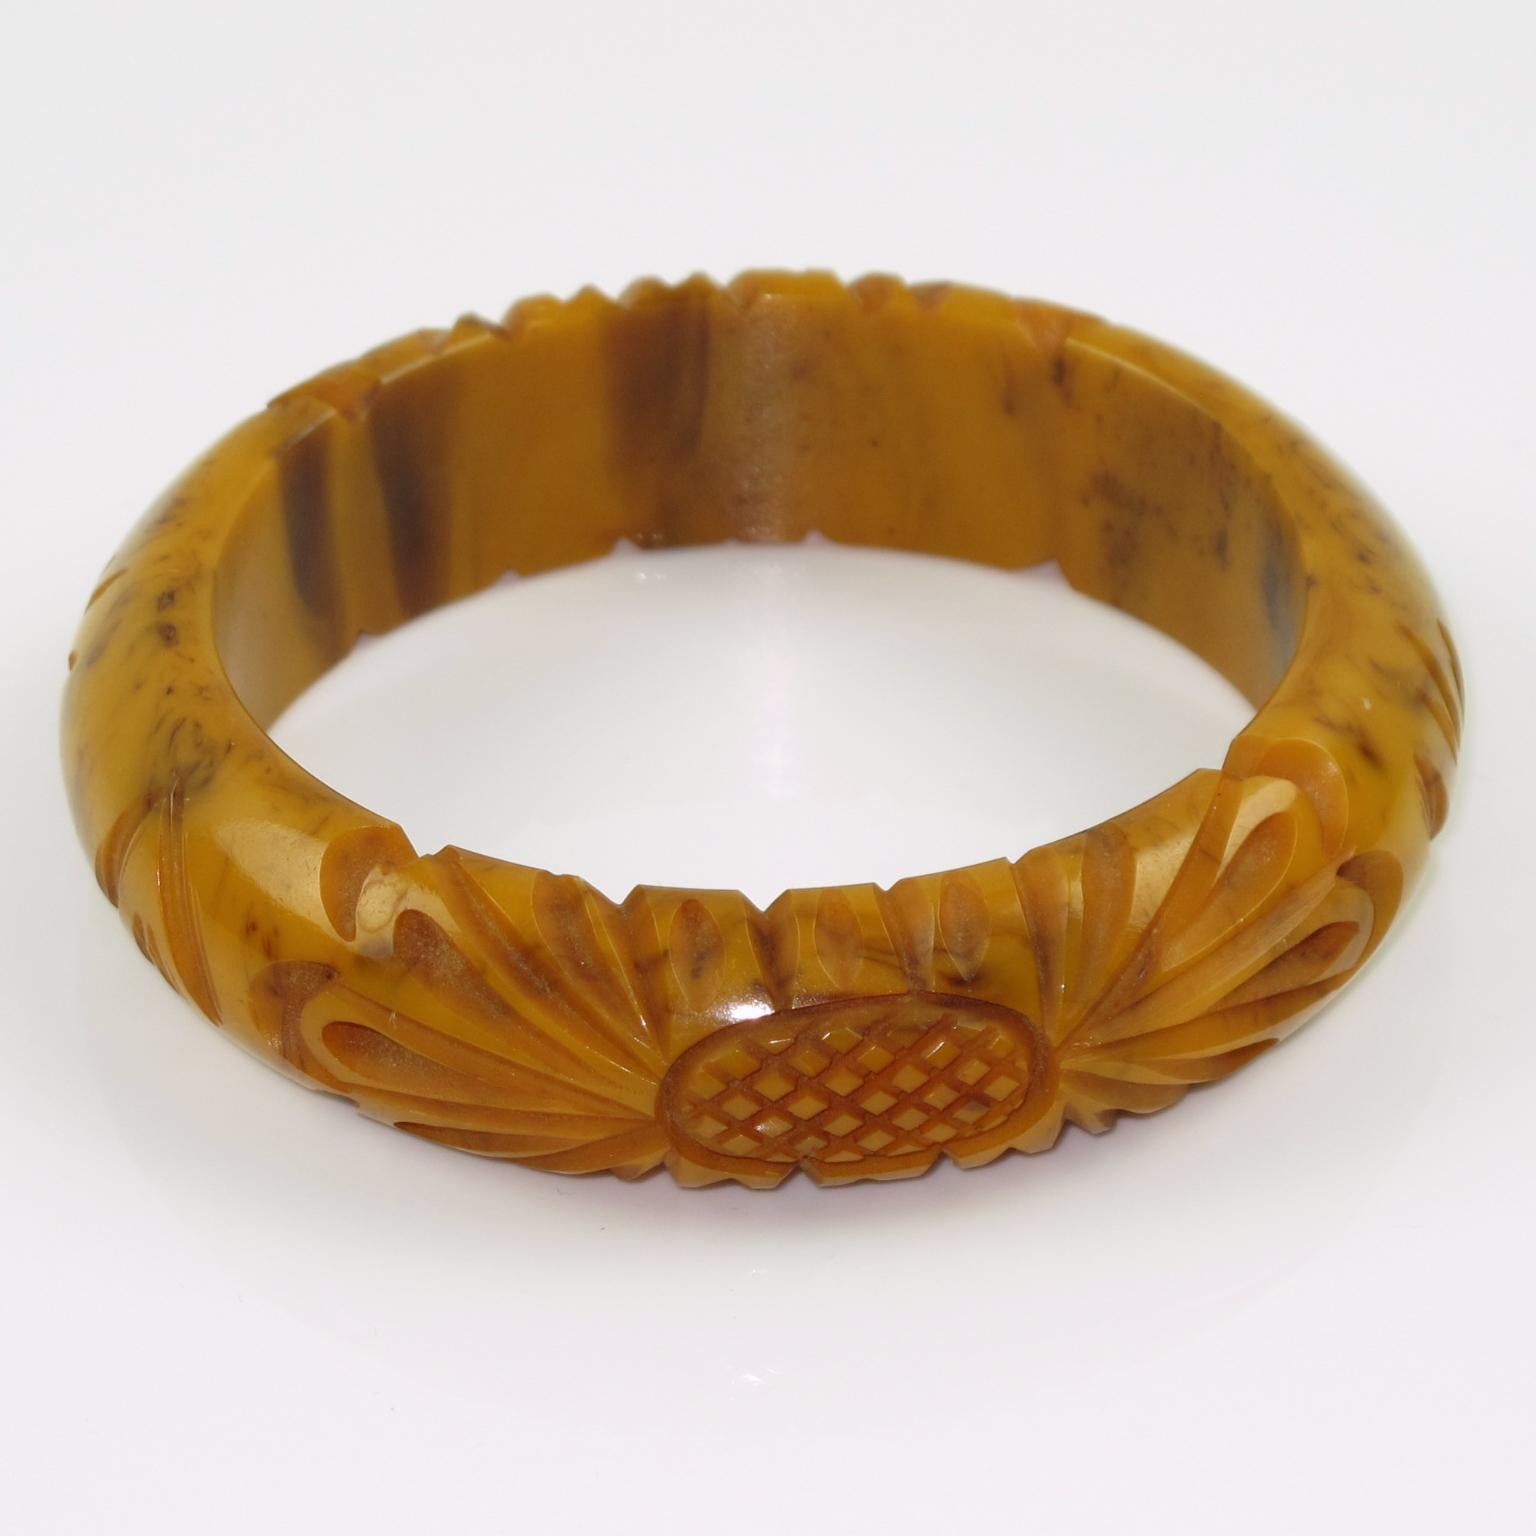 This stunning banana brown marble Bakelite carved bracelet bangle features a domed shape with deep floral carving, two designs on the bracelet, and a thick wall. The piece boasts an intense caramel yellow marbled tone with cloudy brown swirls, also